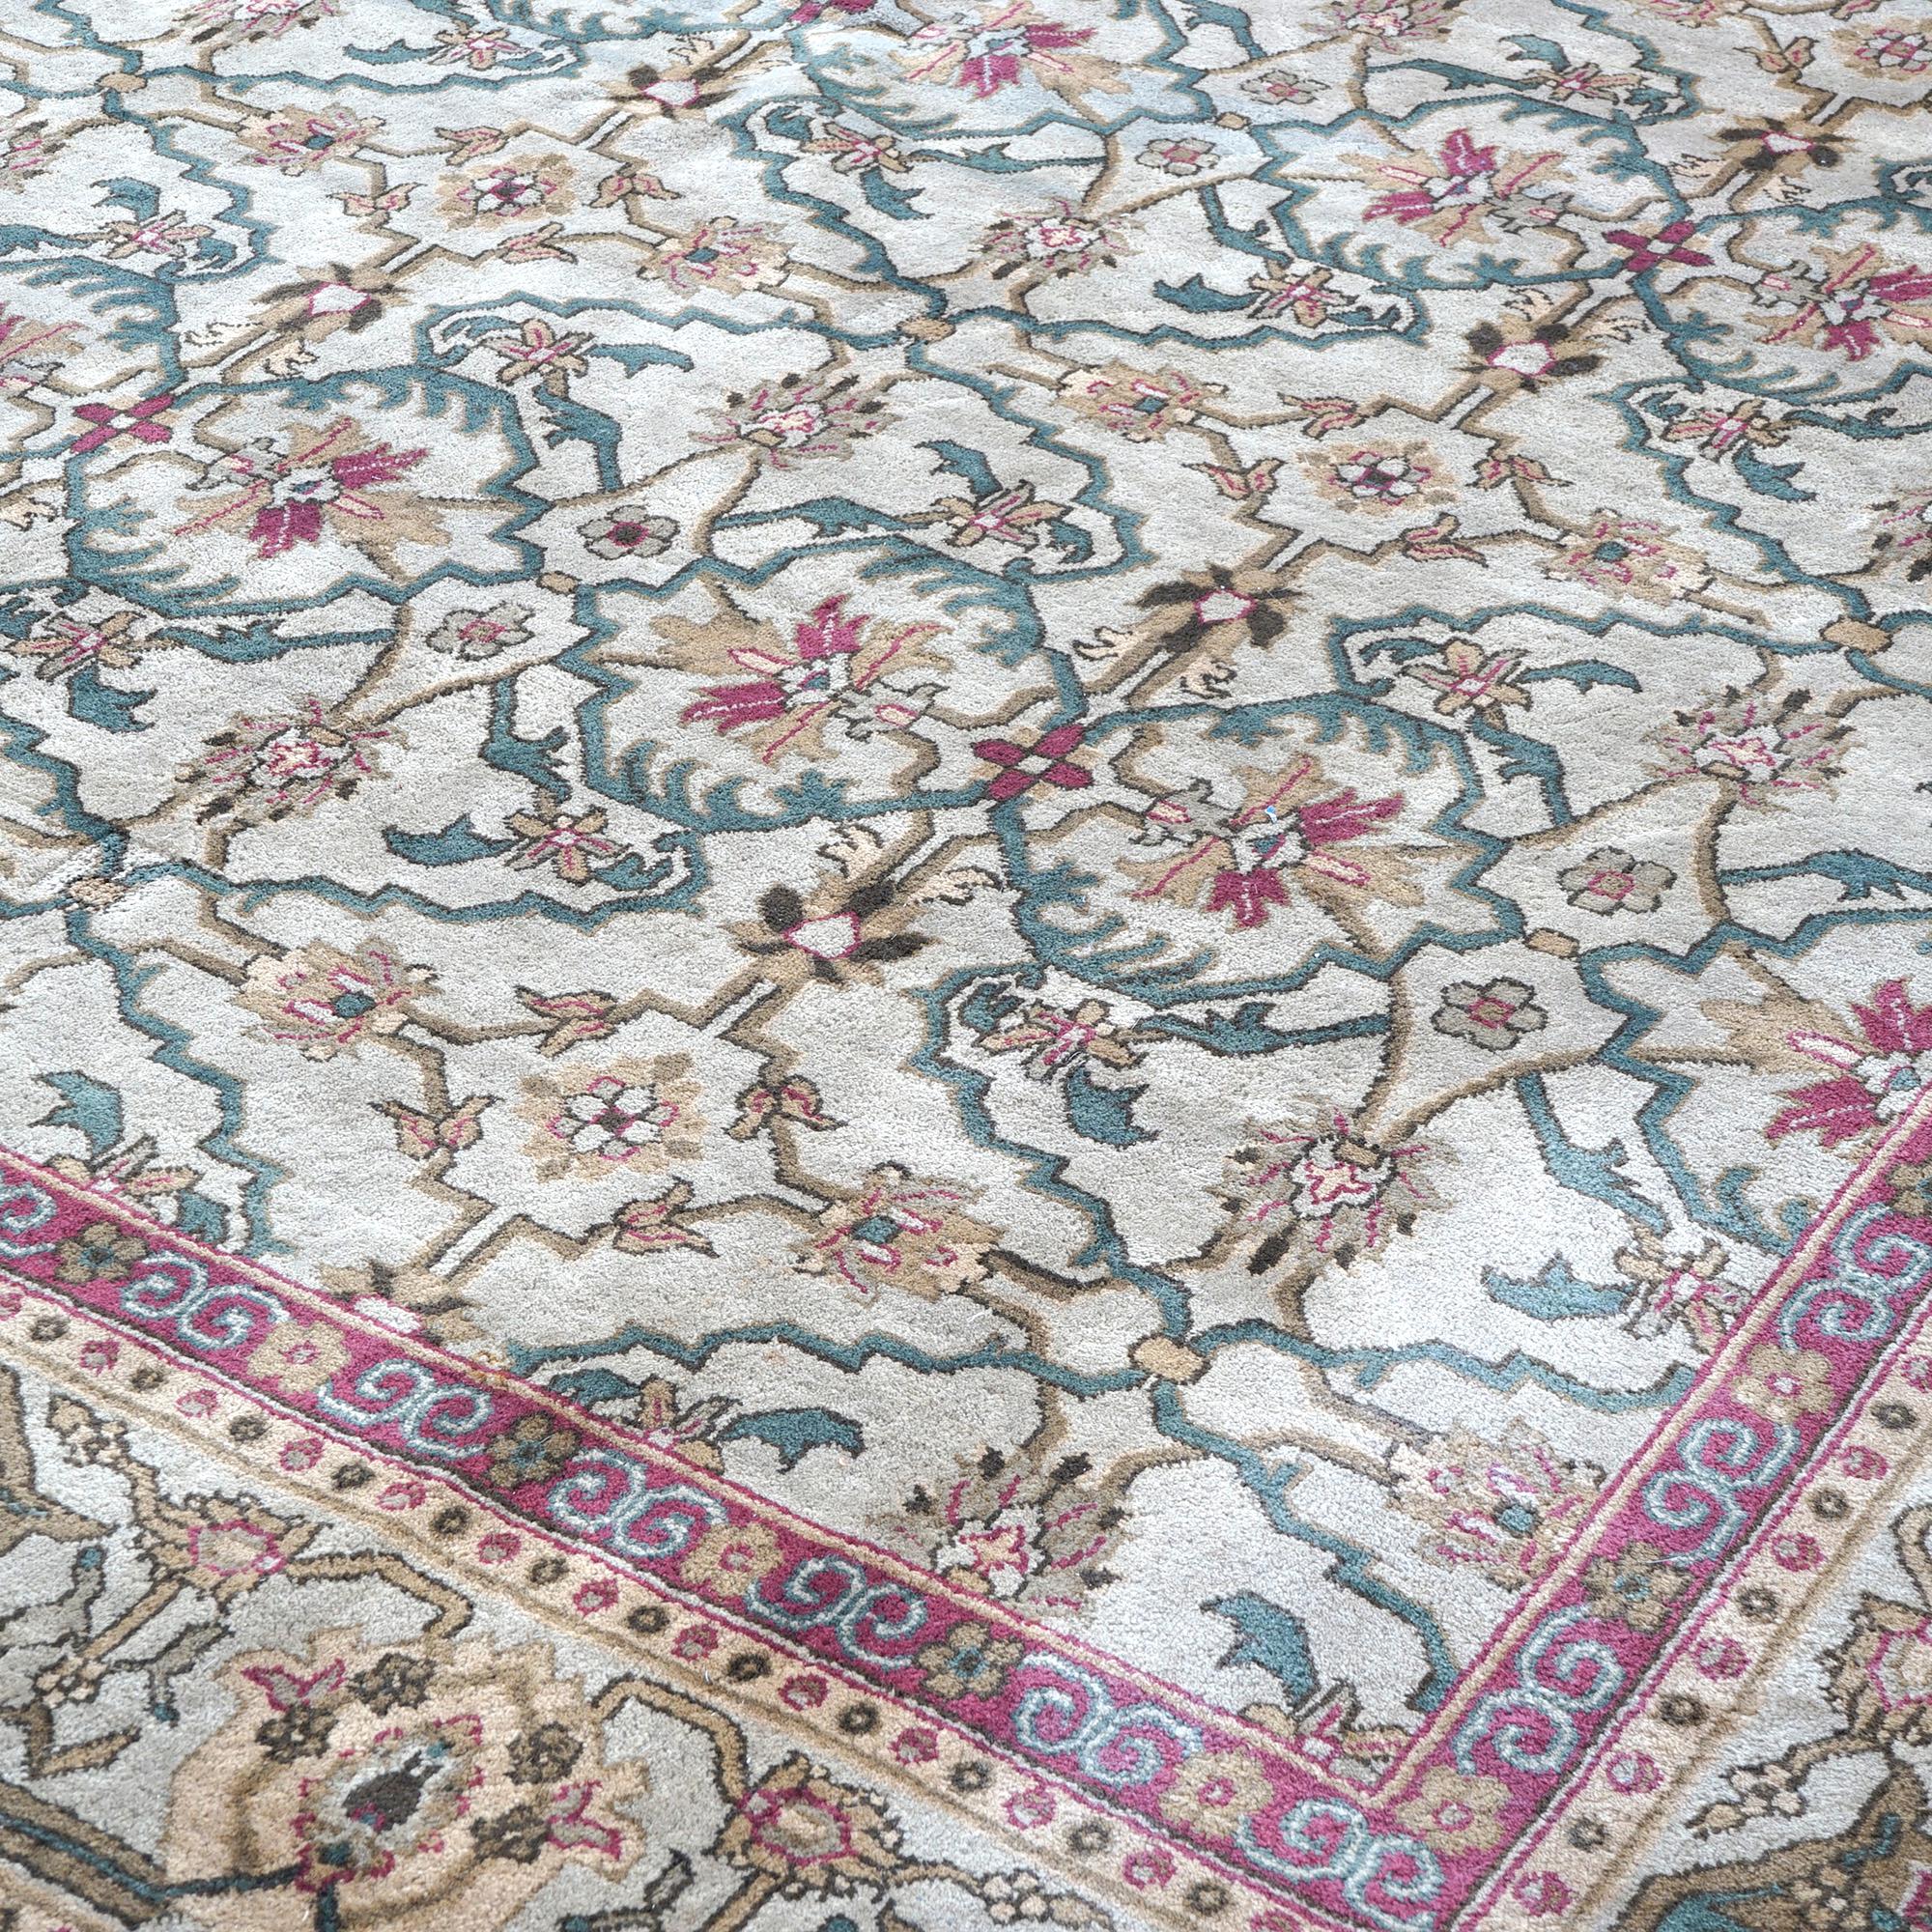 Agra Floral Oriental Wool Carpet 20th C In Good Condition For Sale In Big Flats, NY